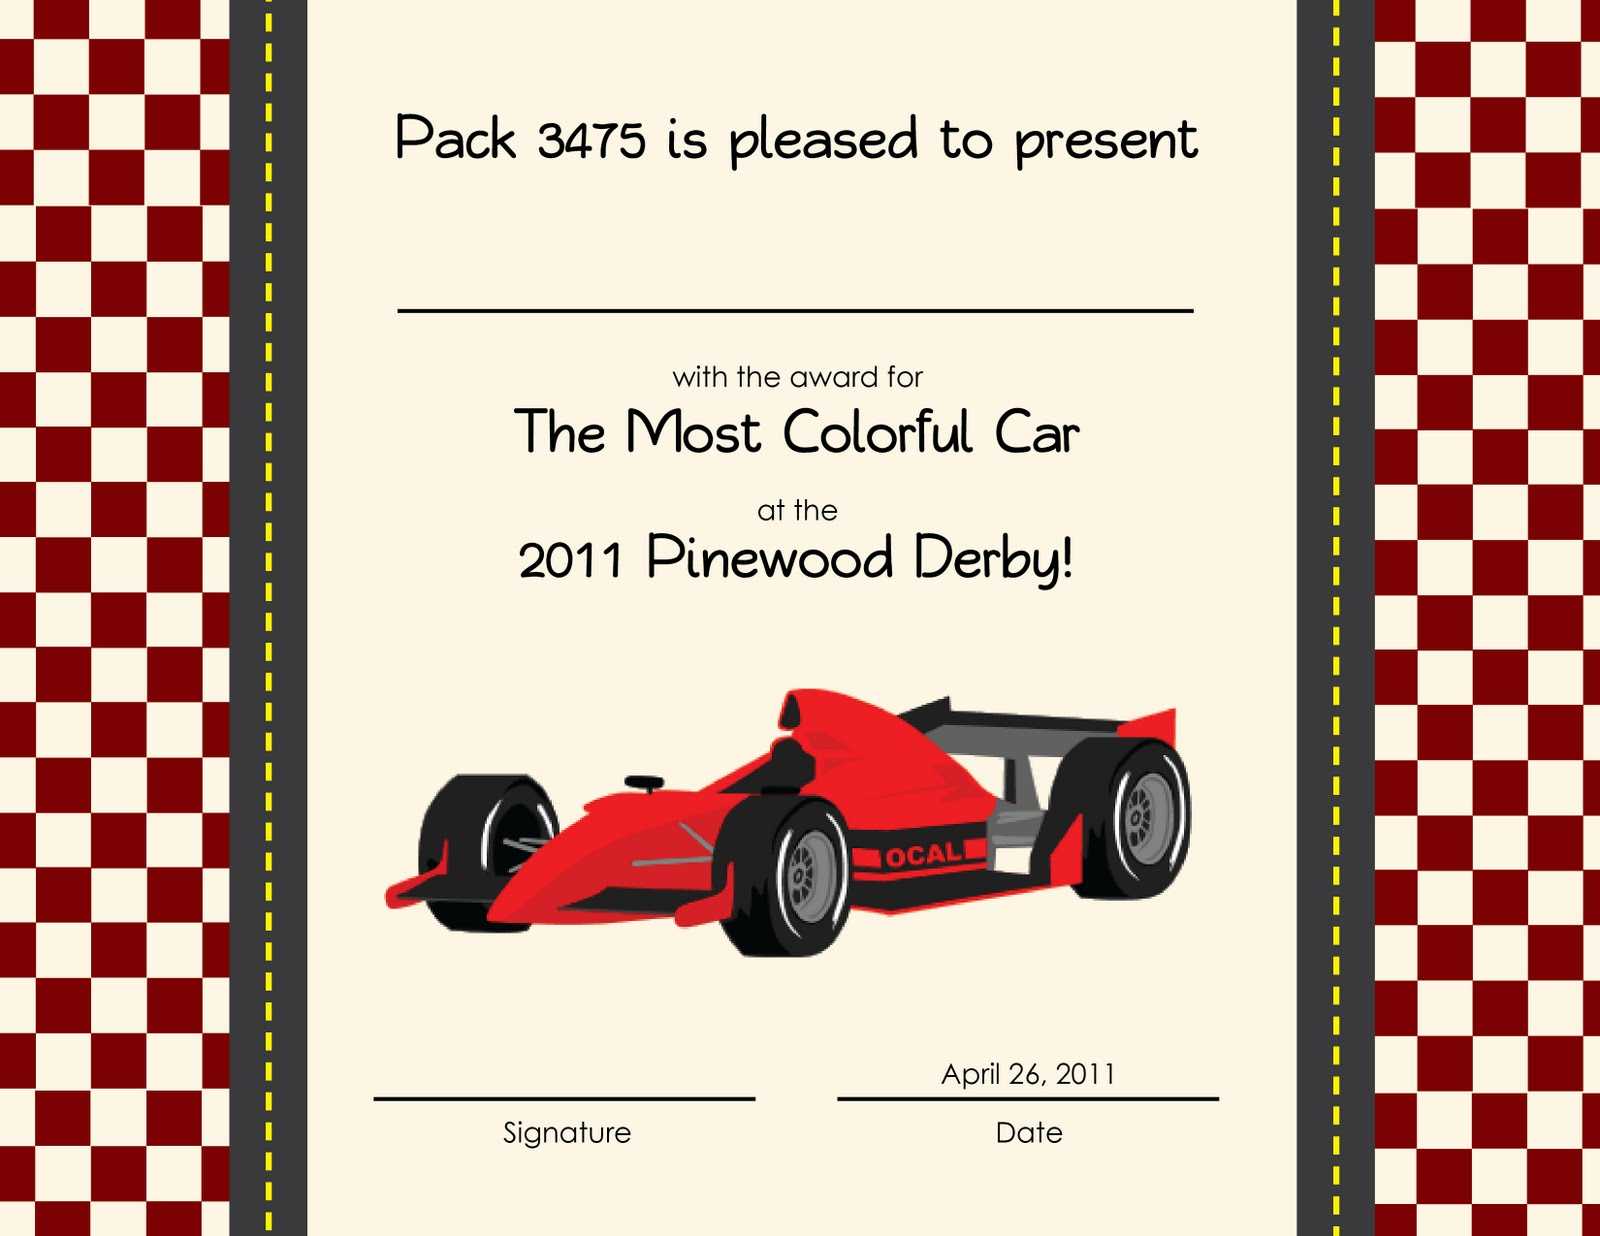 Pinewood Derby Certificate Templates ] – Pinewood Derby Pertaining To Pinewood Derby Certificate Template